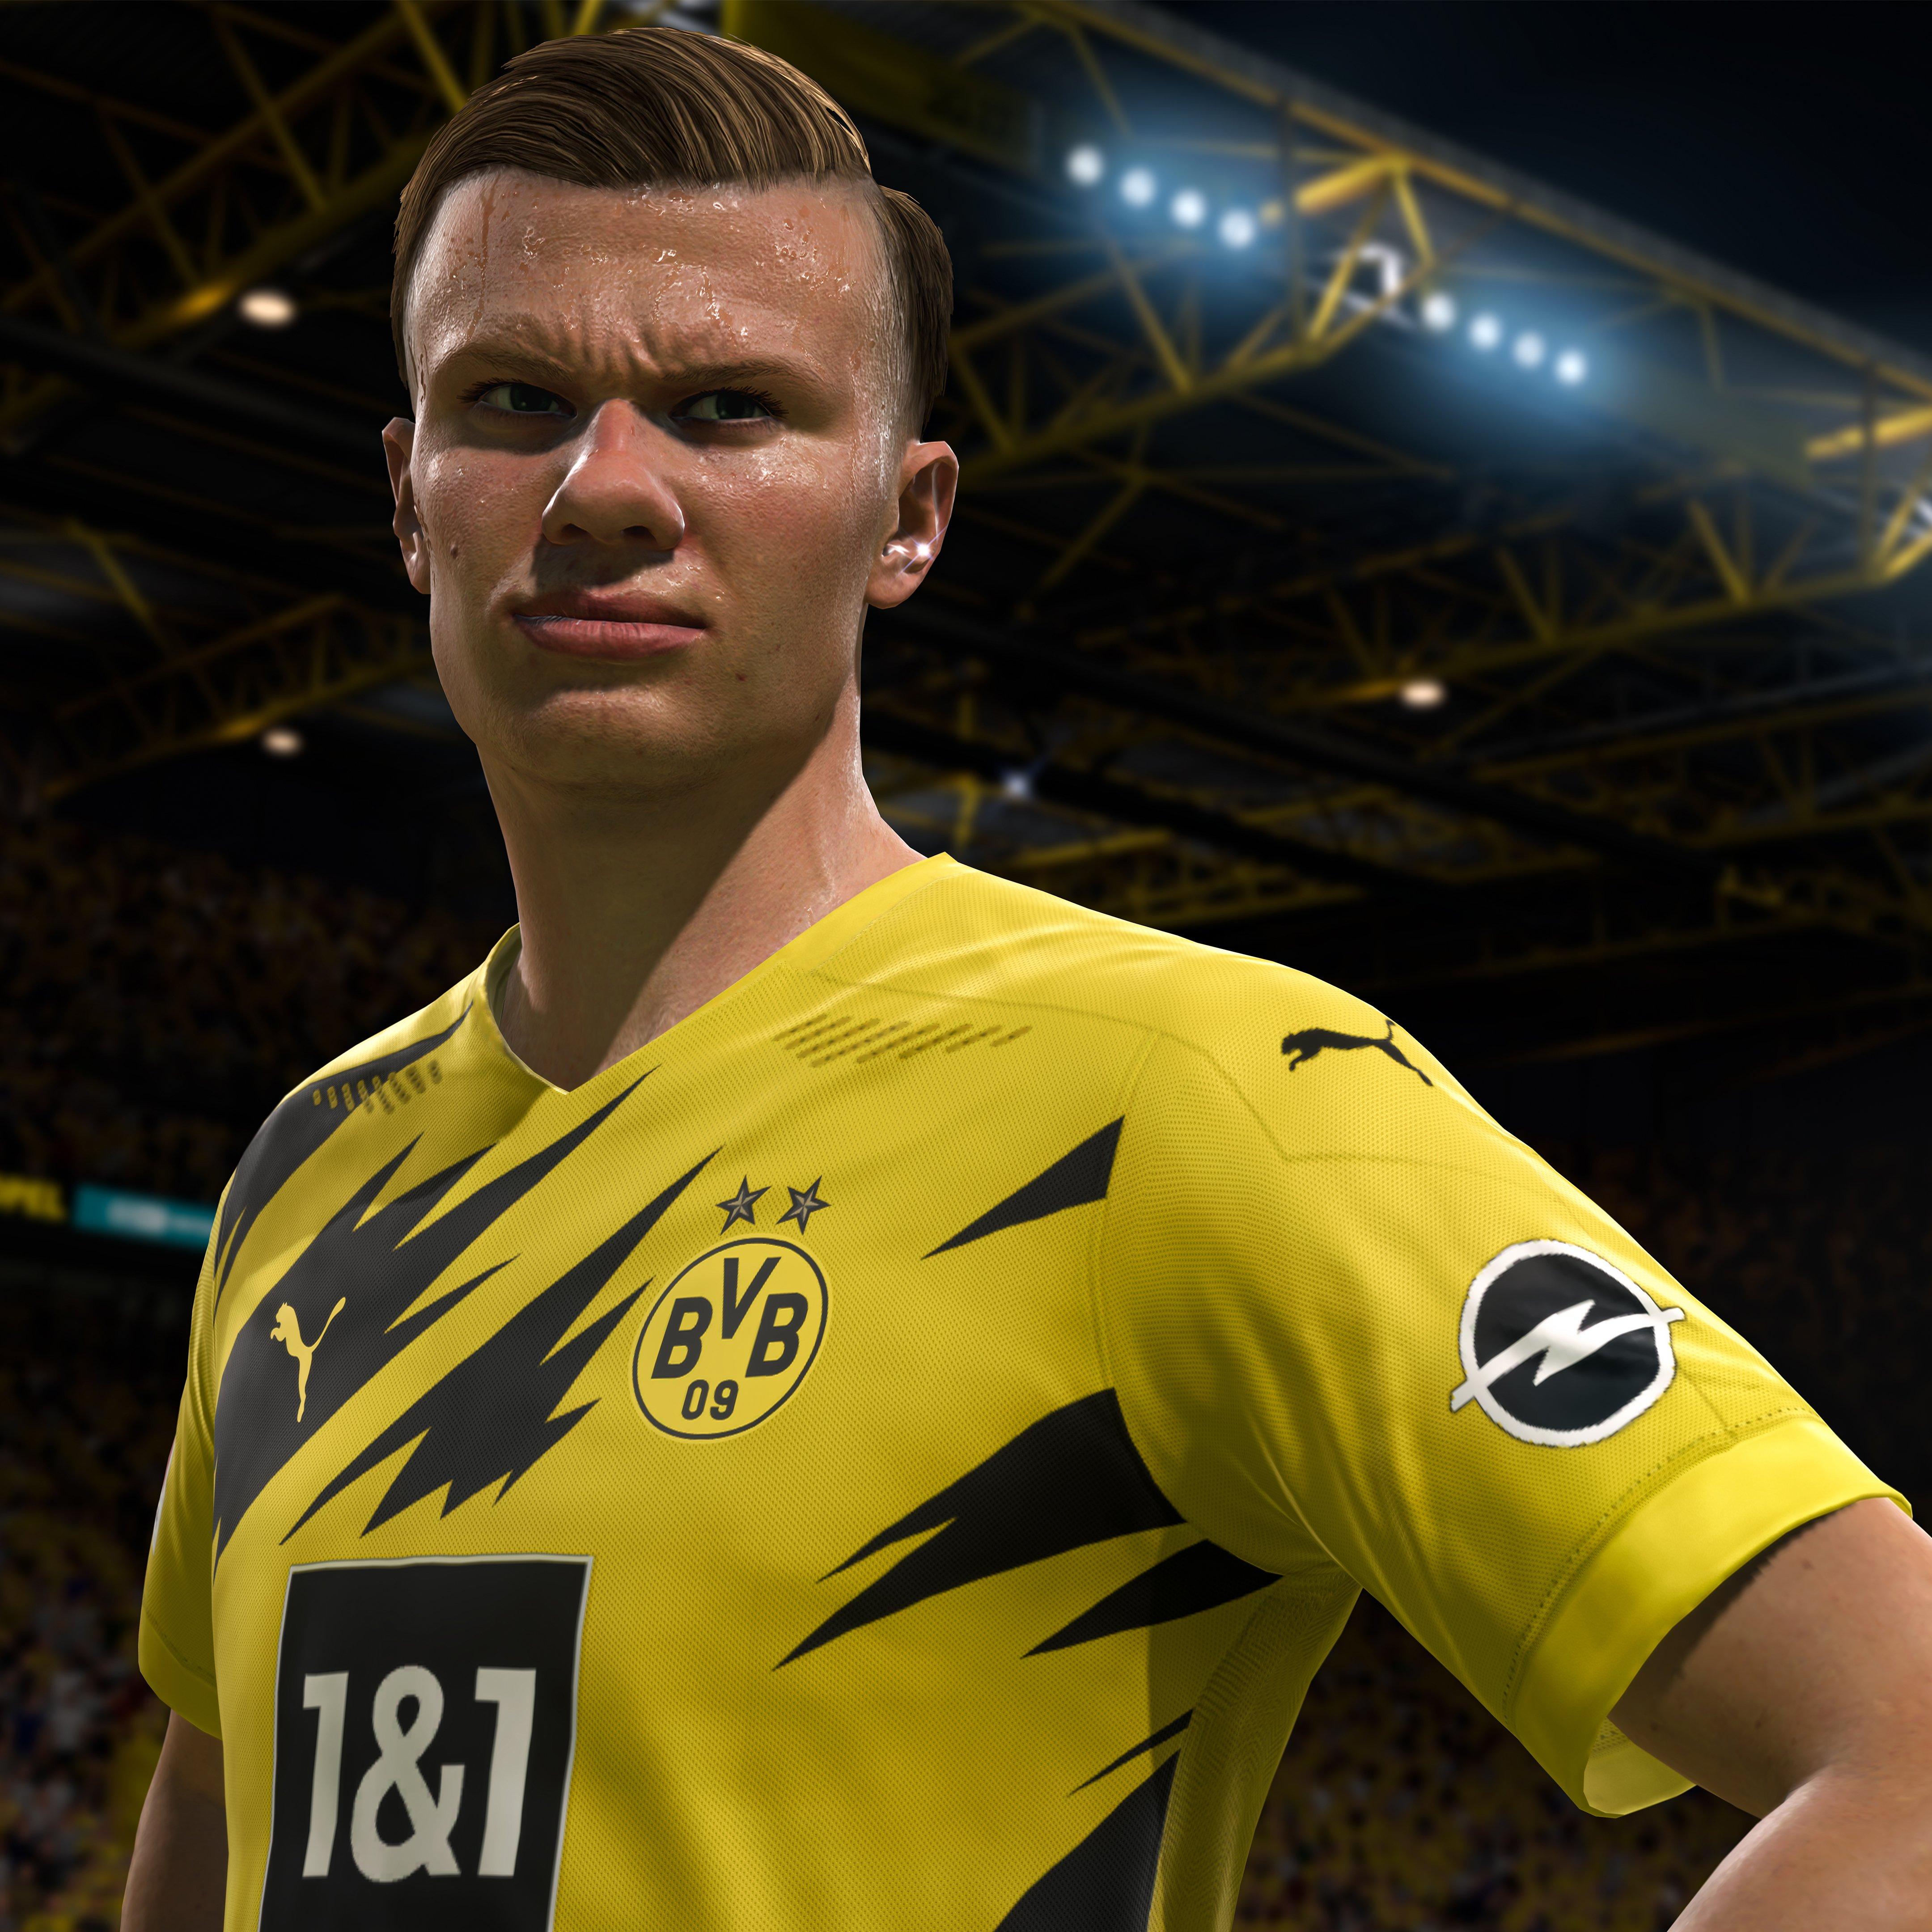 Geralds Games - Get FIFA 21 For Android and iOS Device.